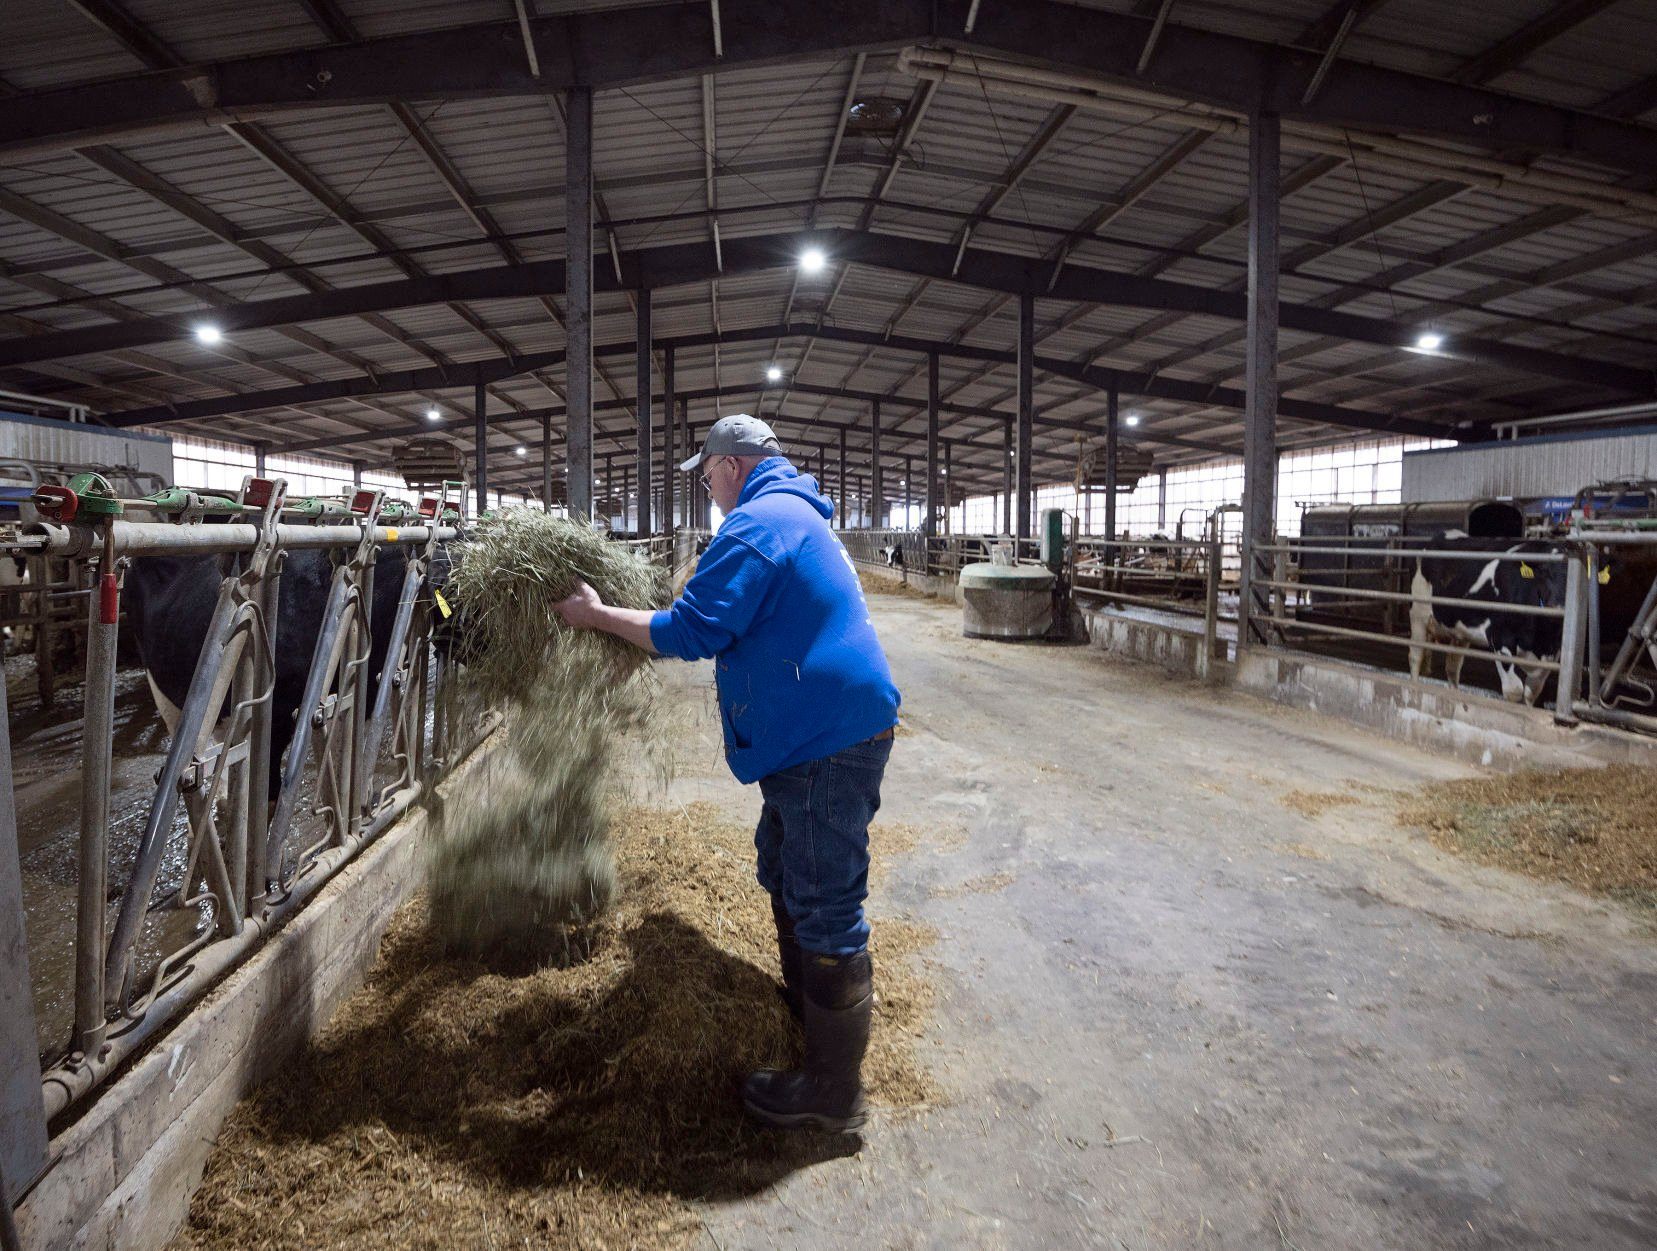 Peter Winch feeds hay to the cattle in one of the barns on his farm in rural Fennimore, Wis., on Wednesday, March 23, 2022.    PHOTO CREDIT: Stephen Gassman